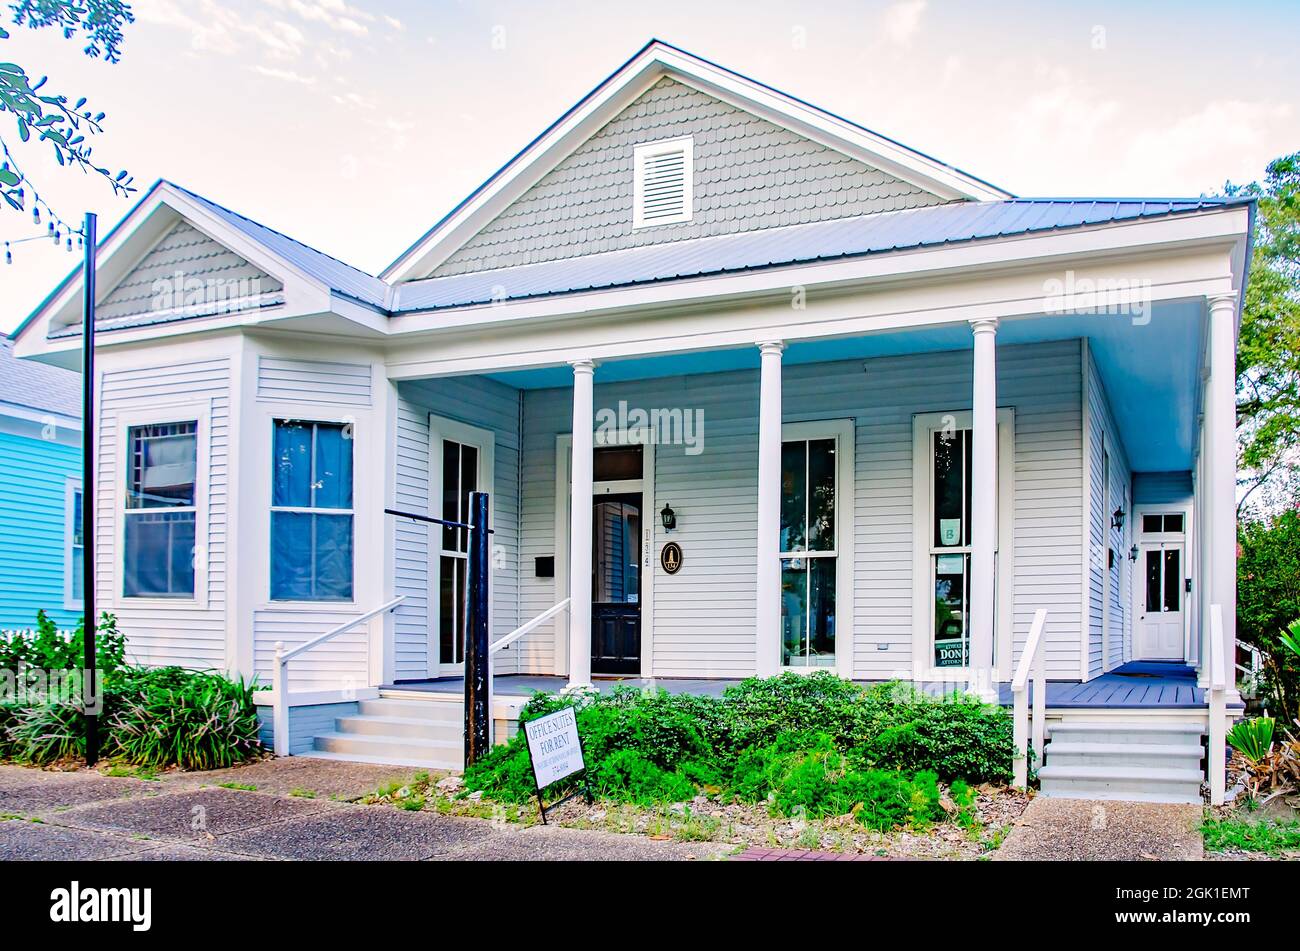 A  1910 Queen Anne house is pictured on Rue Magnolia, Sept. 5, 2021, in Biloxi, Mississippi. Stock Photo